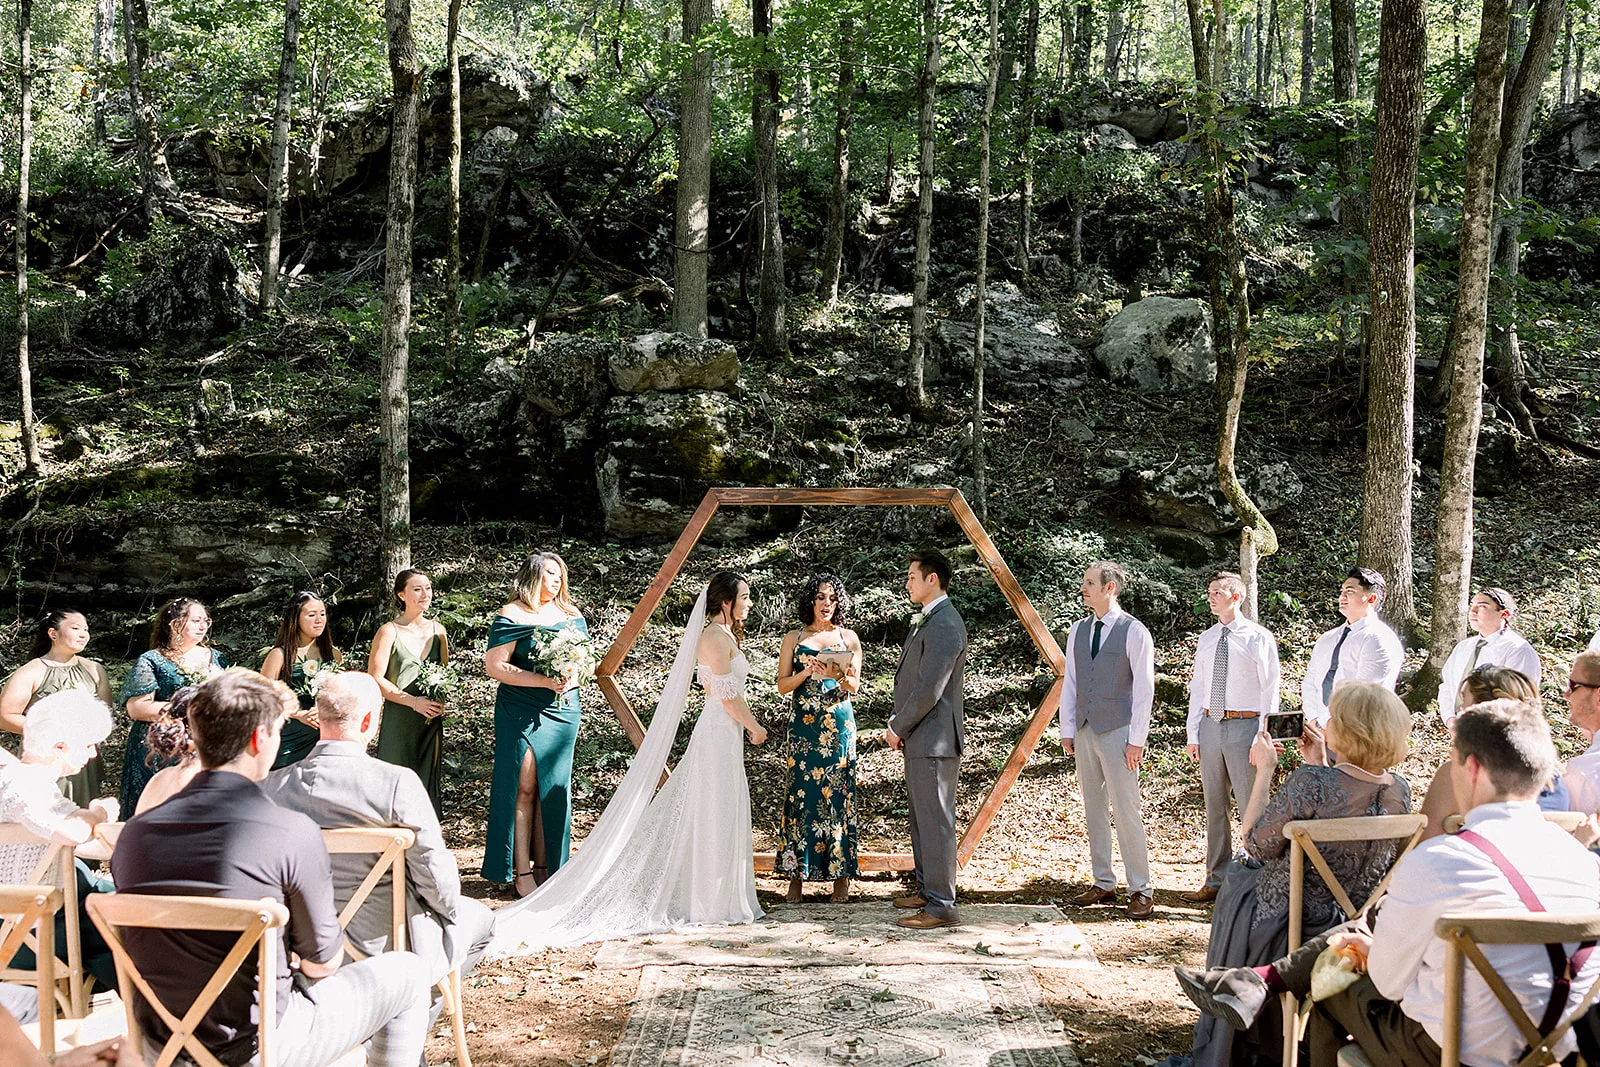 Newlyweds stand under an arbor during their wedding ceremony in the woods